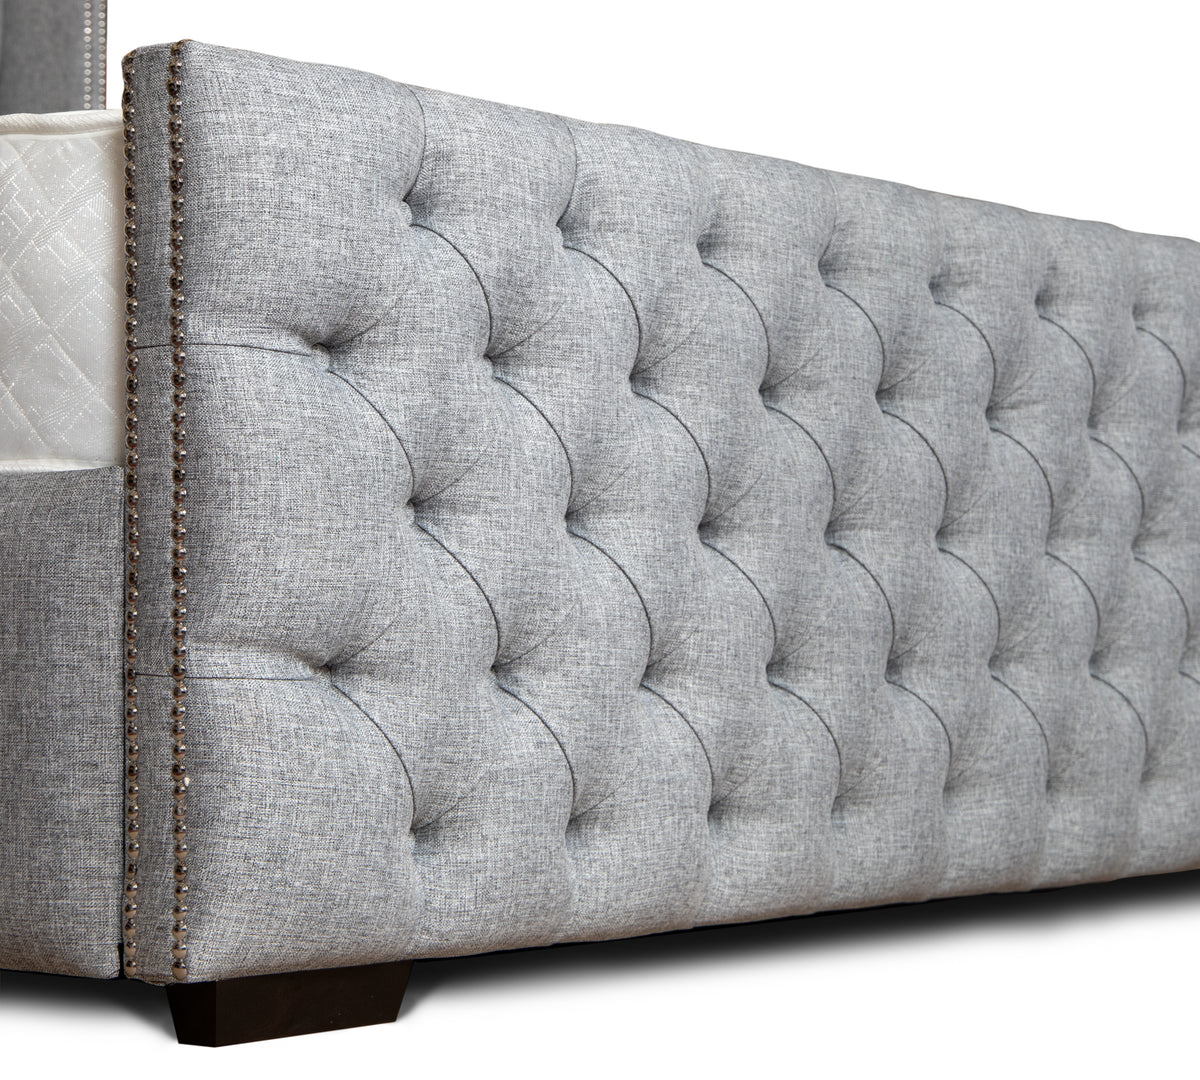 Ayla Tall Winged Chesterfield Bed Frame